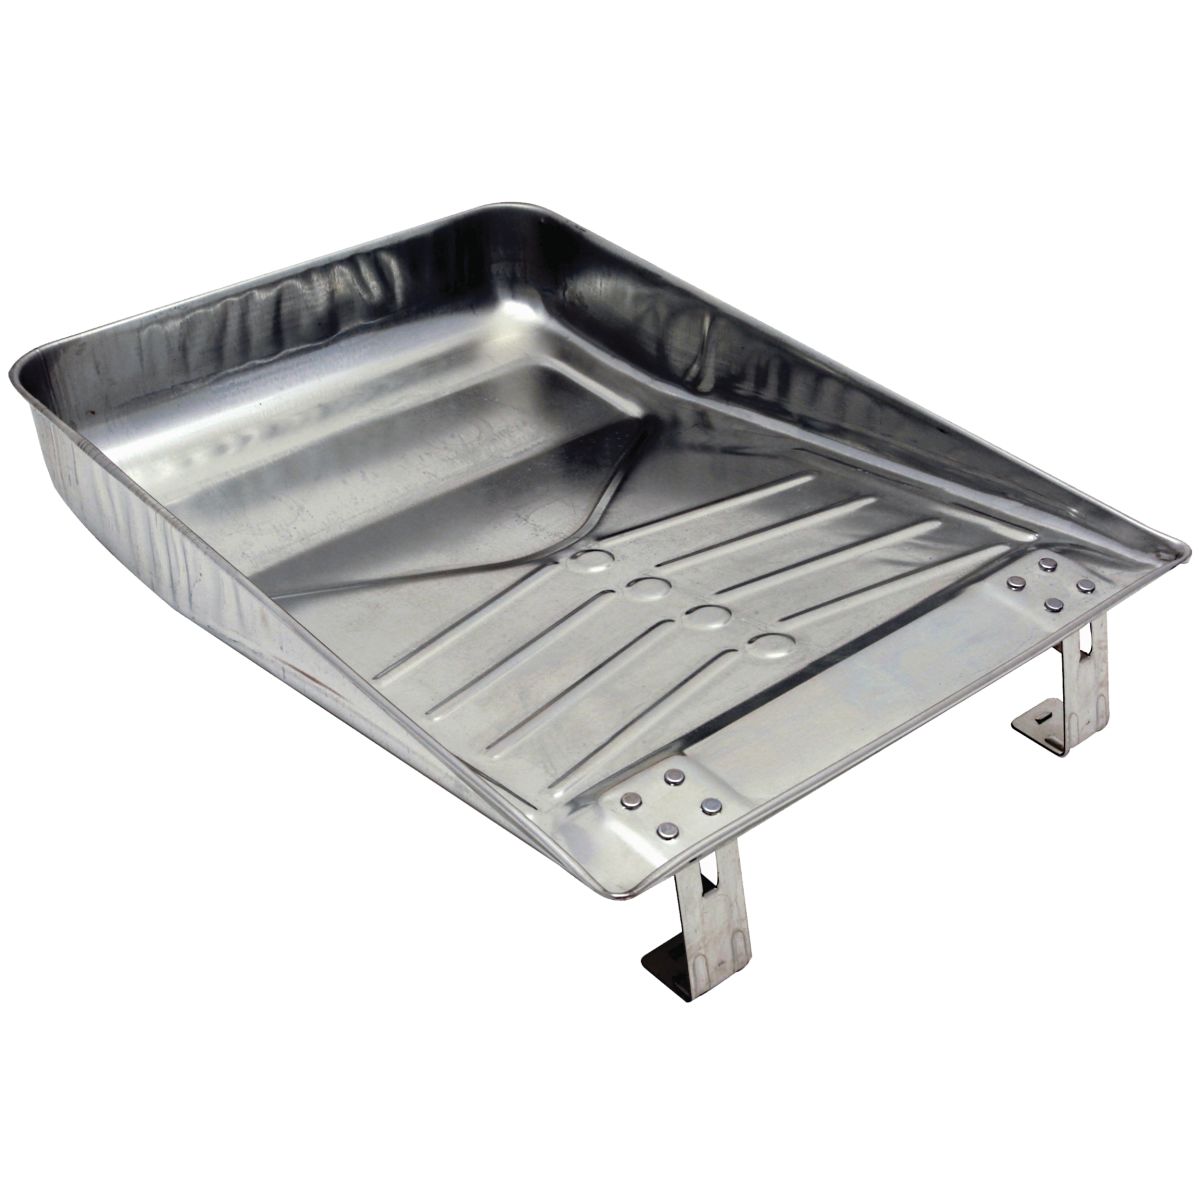 Paint Tray, Paint Roller Tray